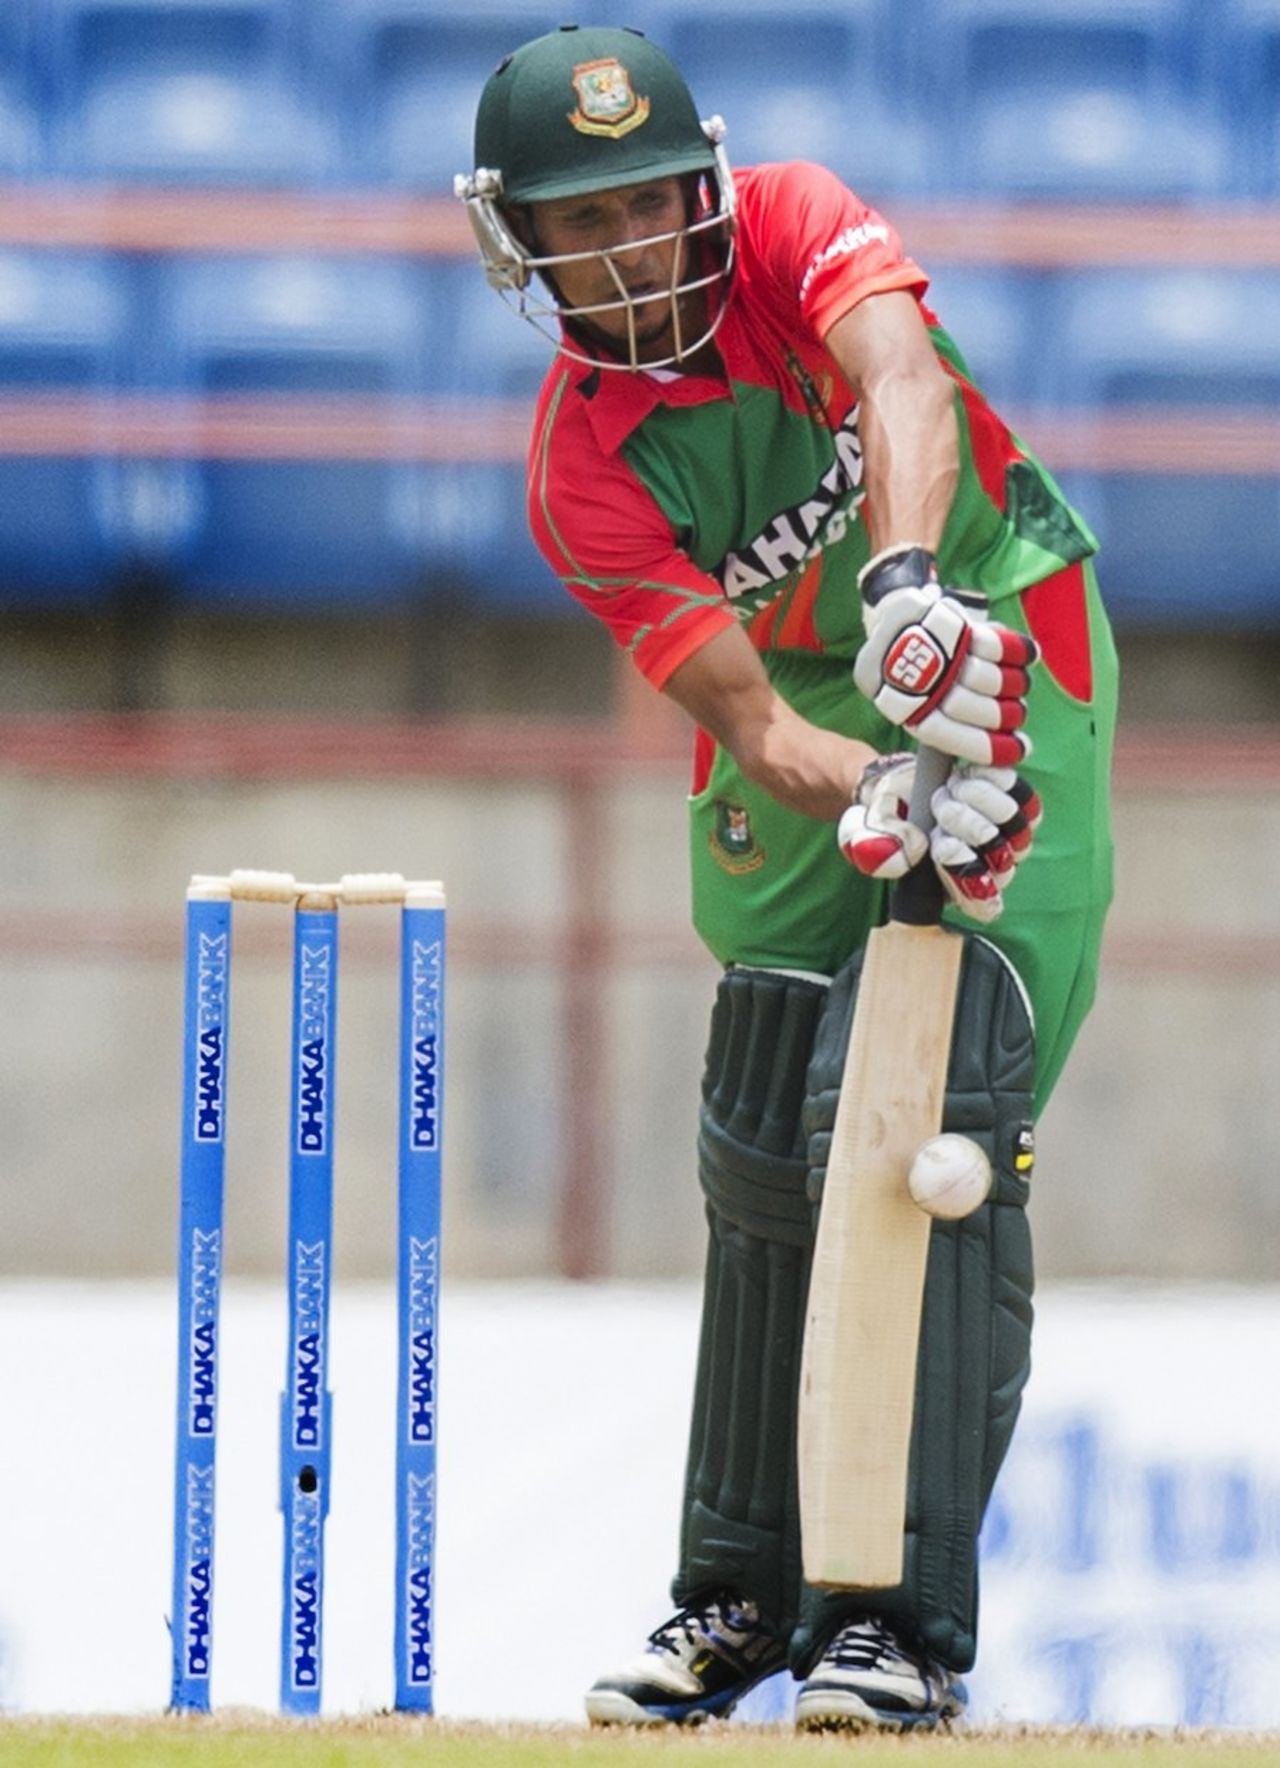 Nasir Hossain scored 26, the second highest score in Bangladesh's innings, West Indies v Bangladesh, 1st ODI, St George's, August 20, 2014